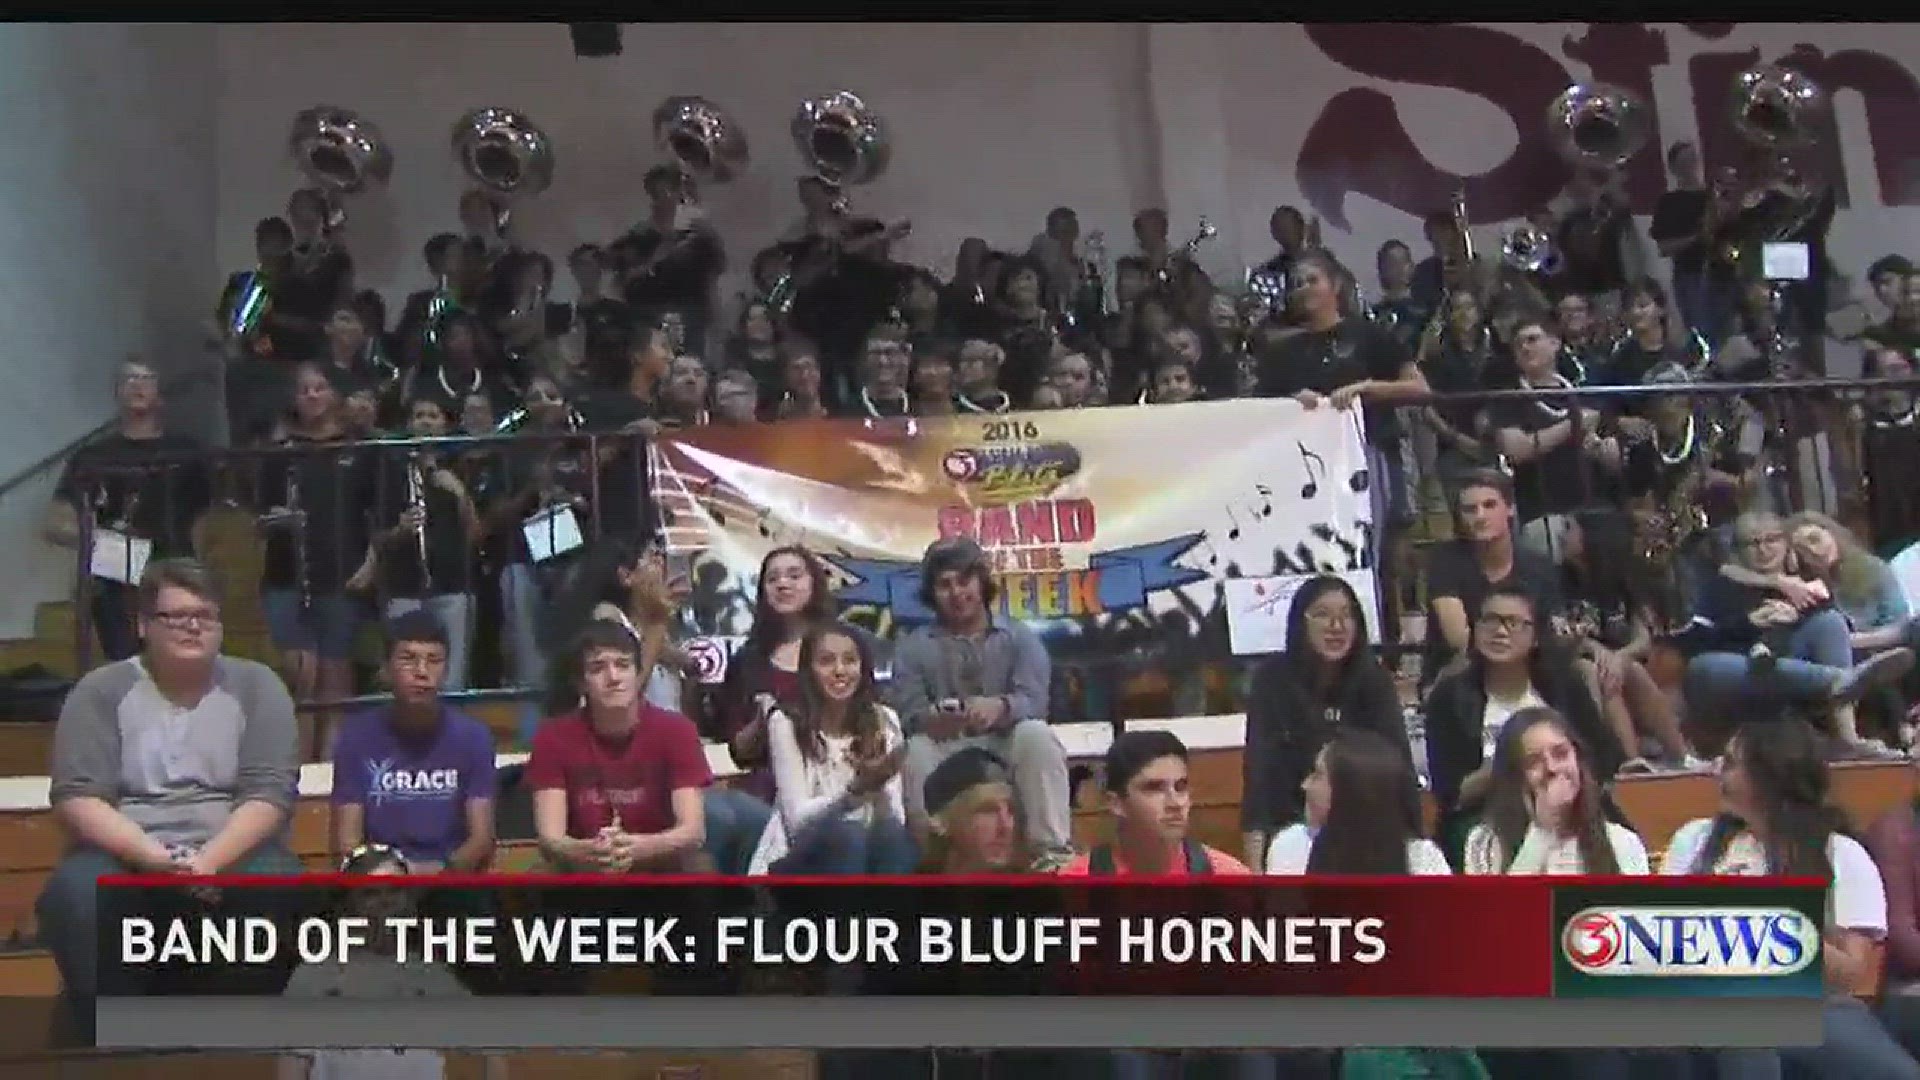 The Hornets knocked off T-M in the online vote earlier in the week.